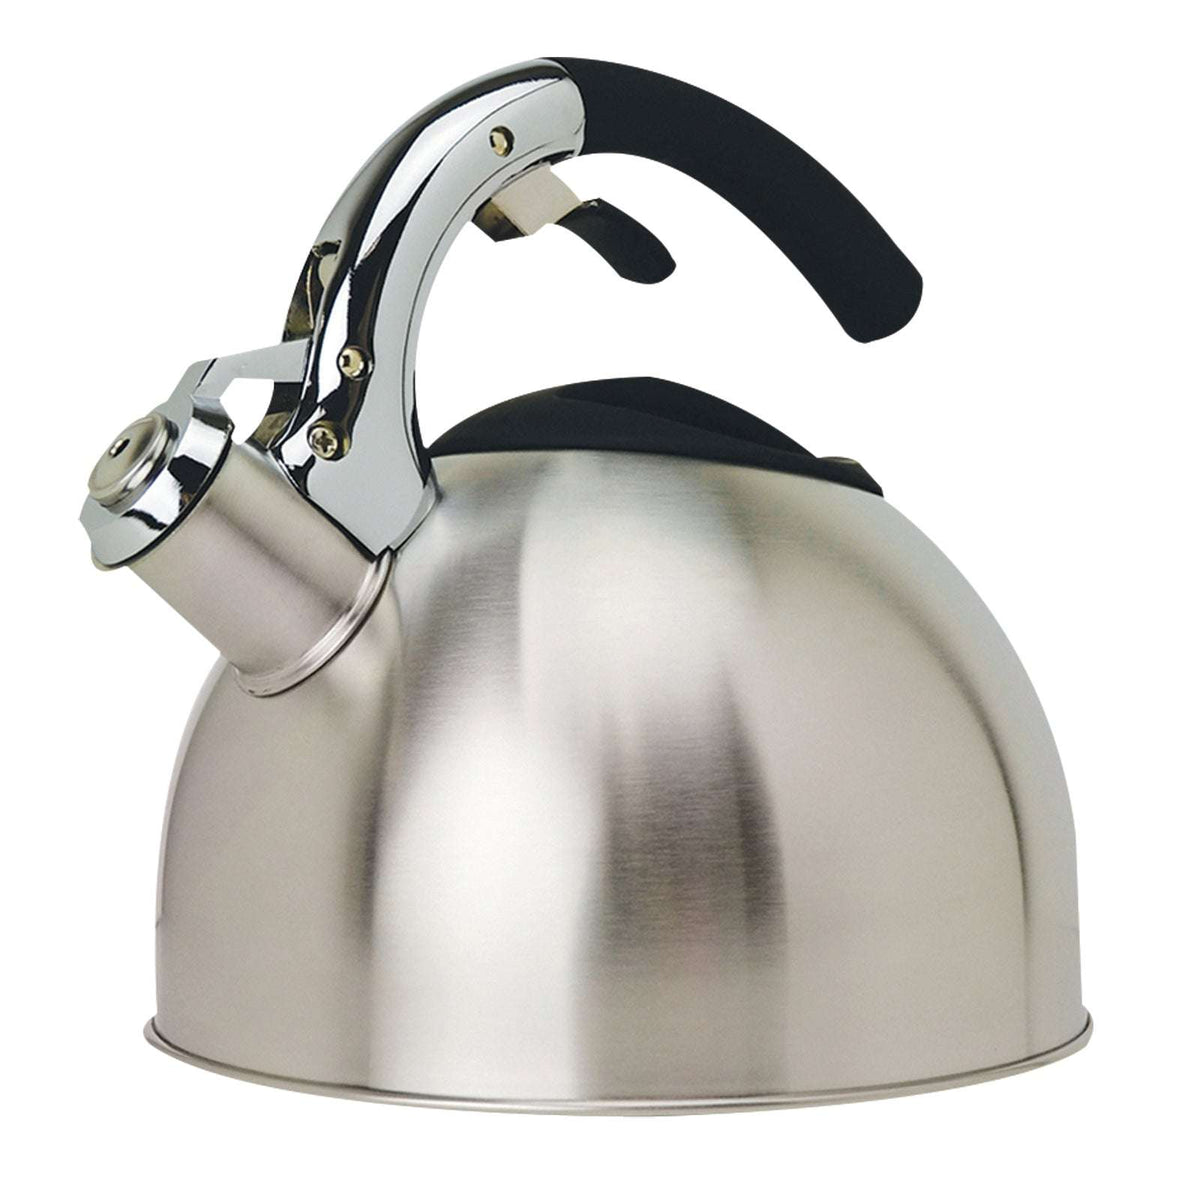 Primula primula avalon whistling kettle - whistling spout, locking spout  -cover, and stay-cool handle - stainless steel - 2.5 quarts